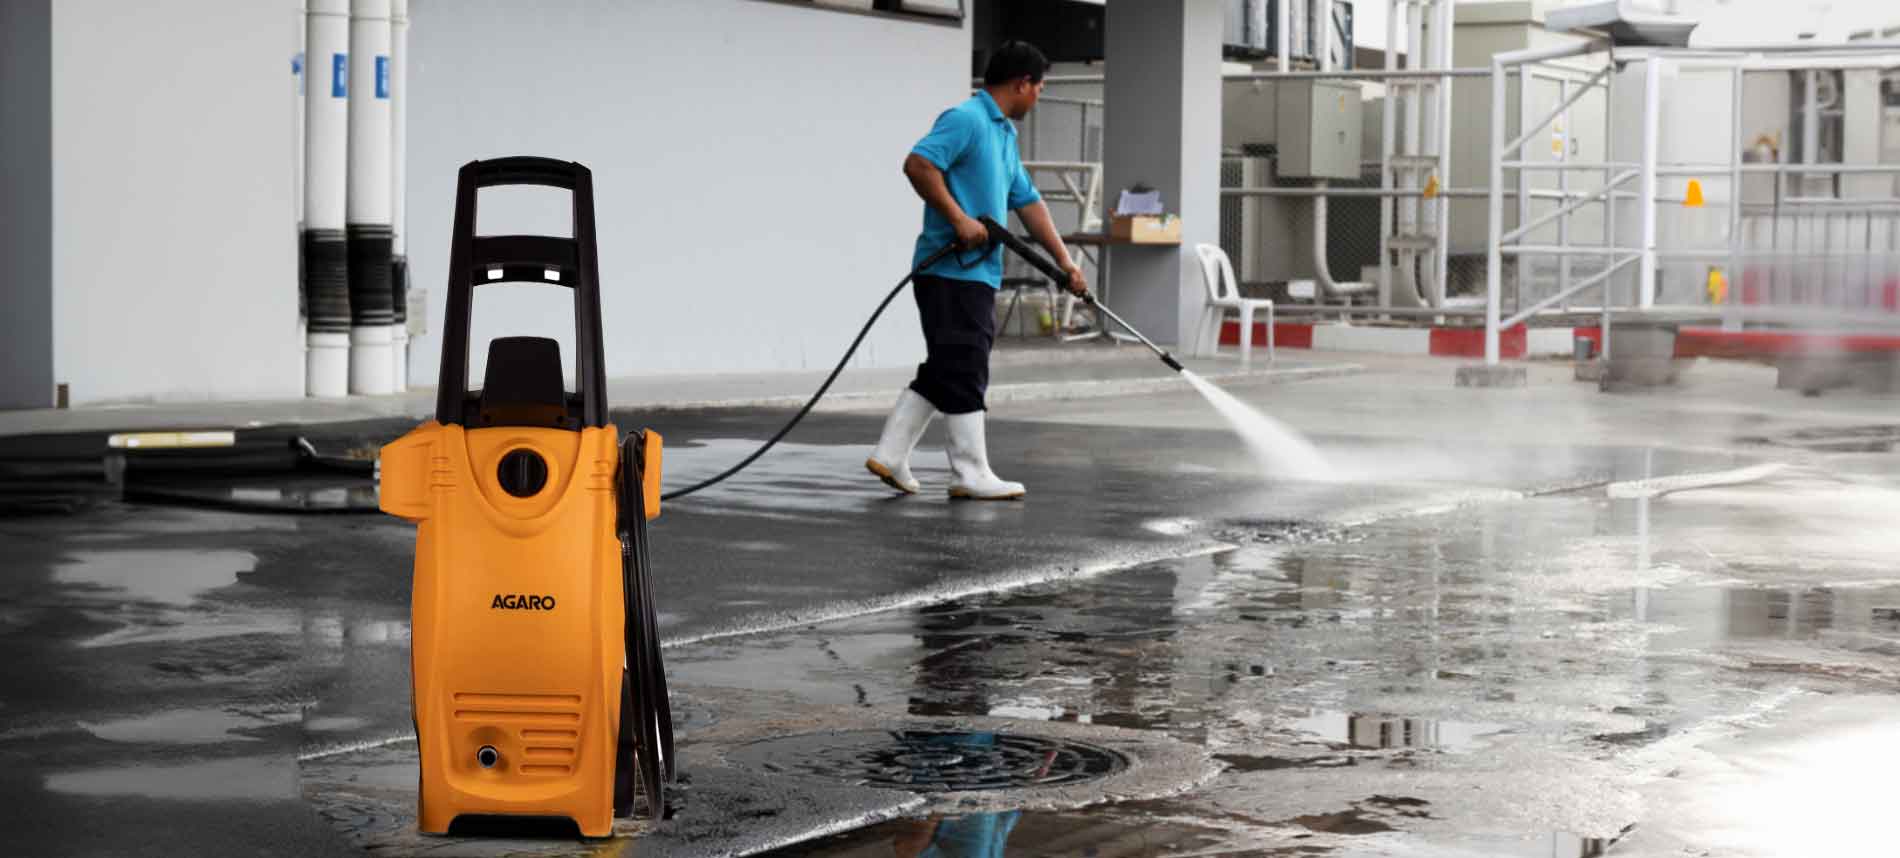 How a car pressure washer works – Advantages and disadvantages